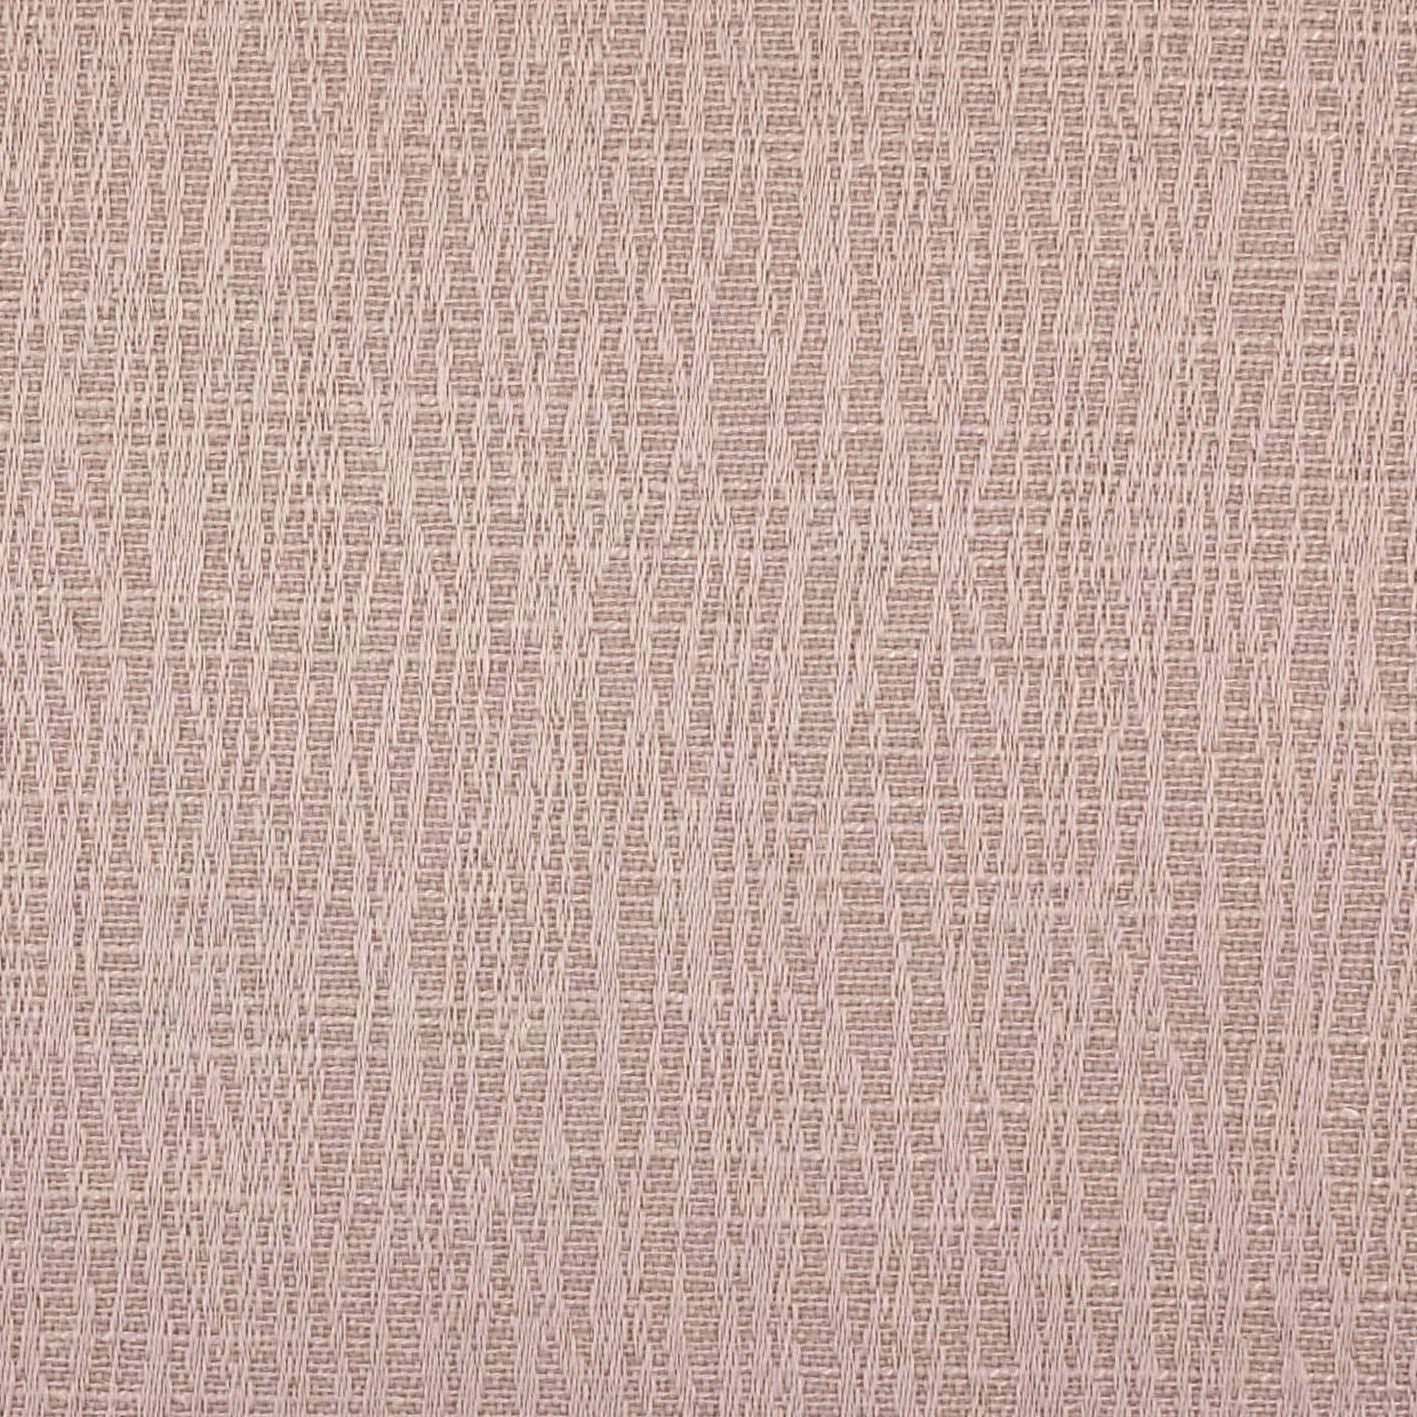 McAlister Textiles Linea Soft Blush Textured Curtains Tailored Curtains 